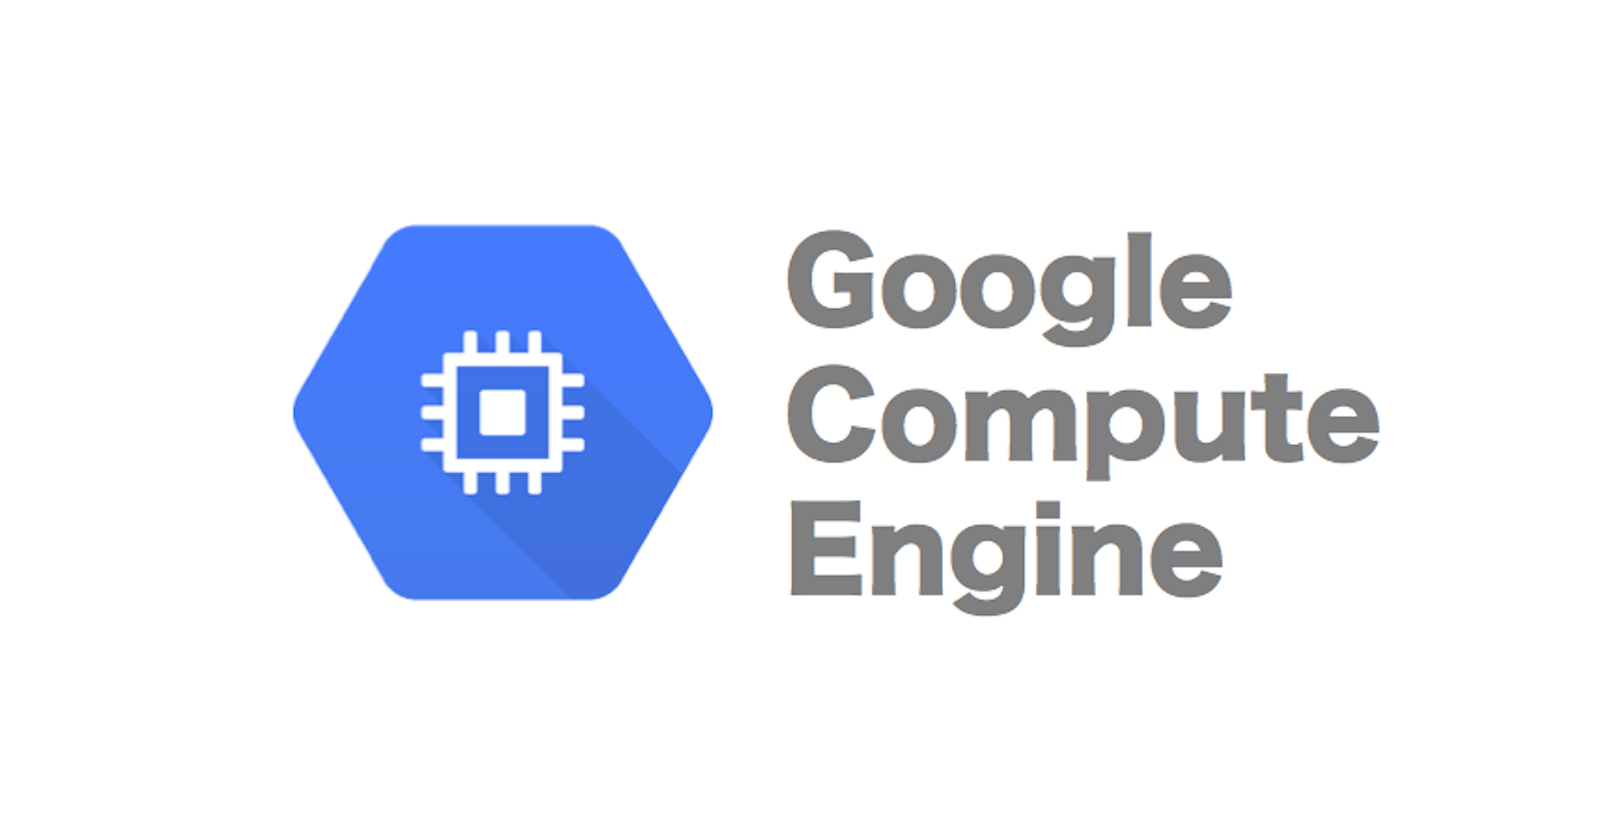 Getting started with Google Compute Engine